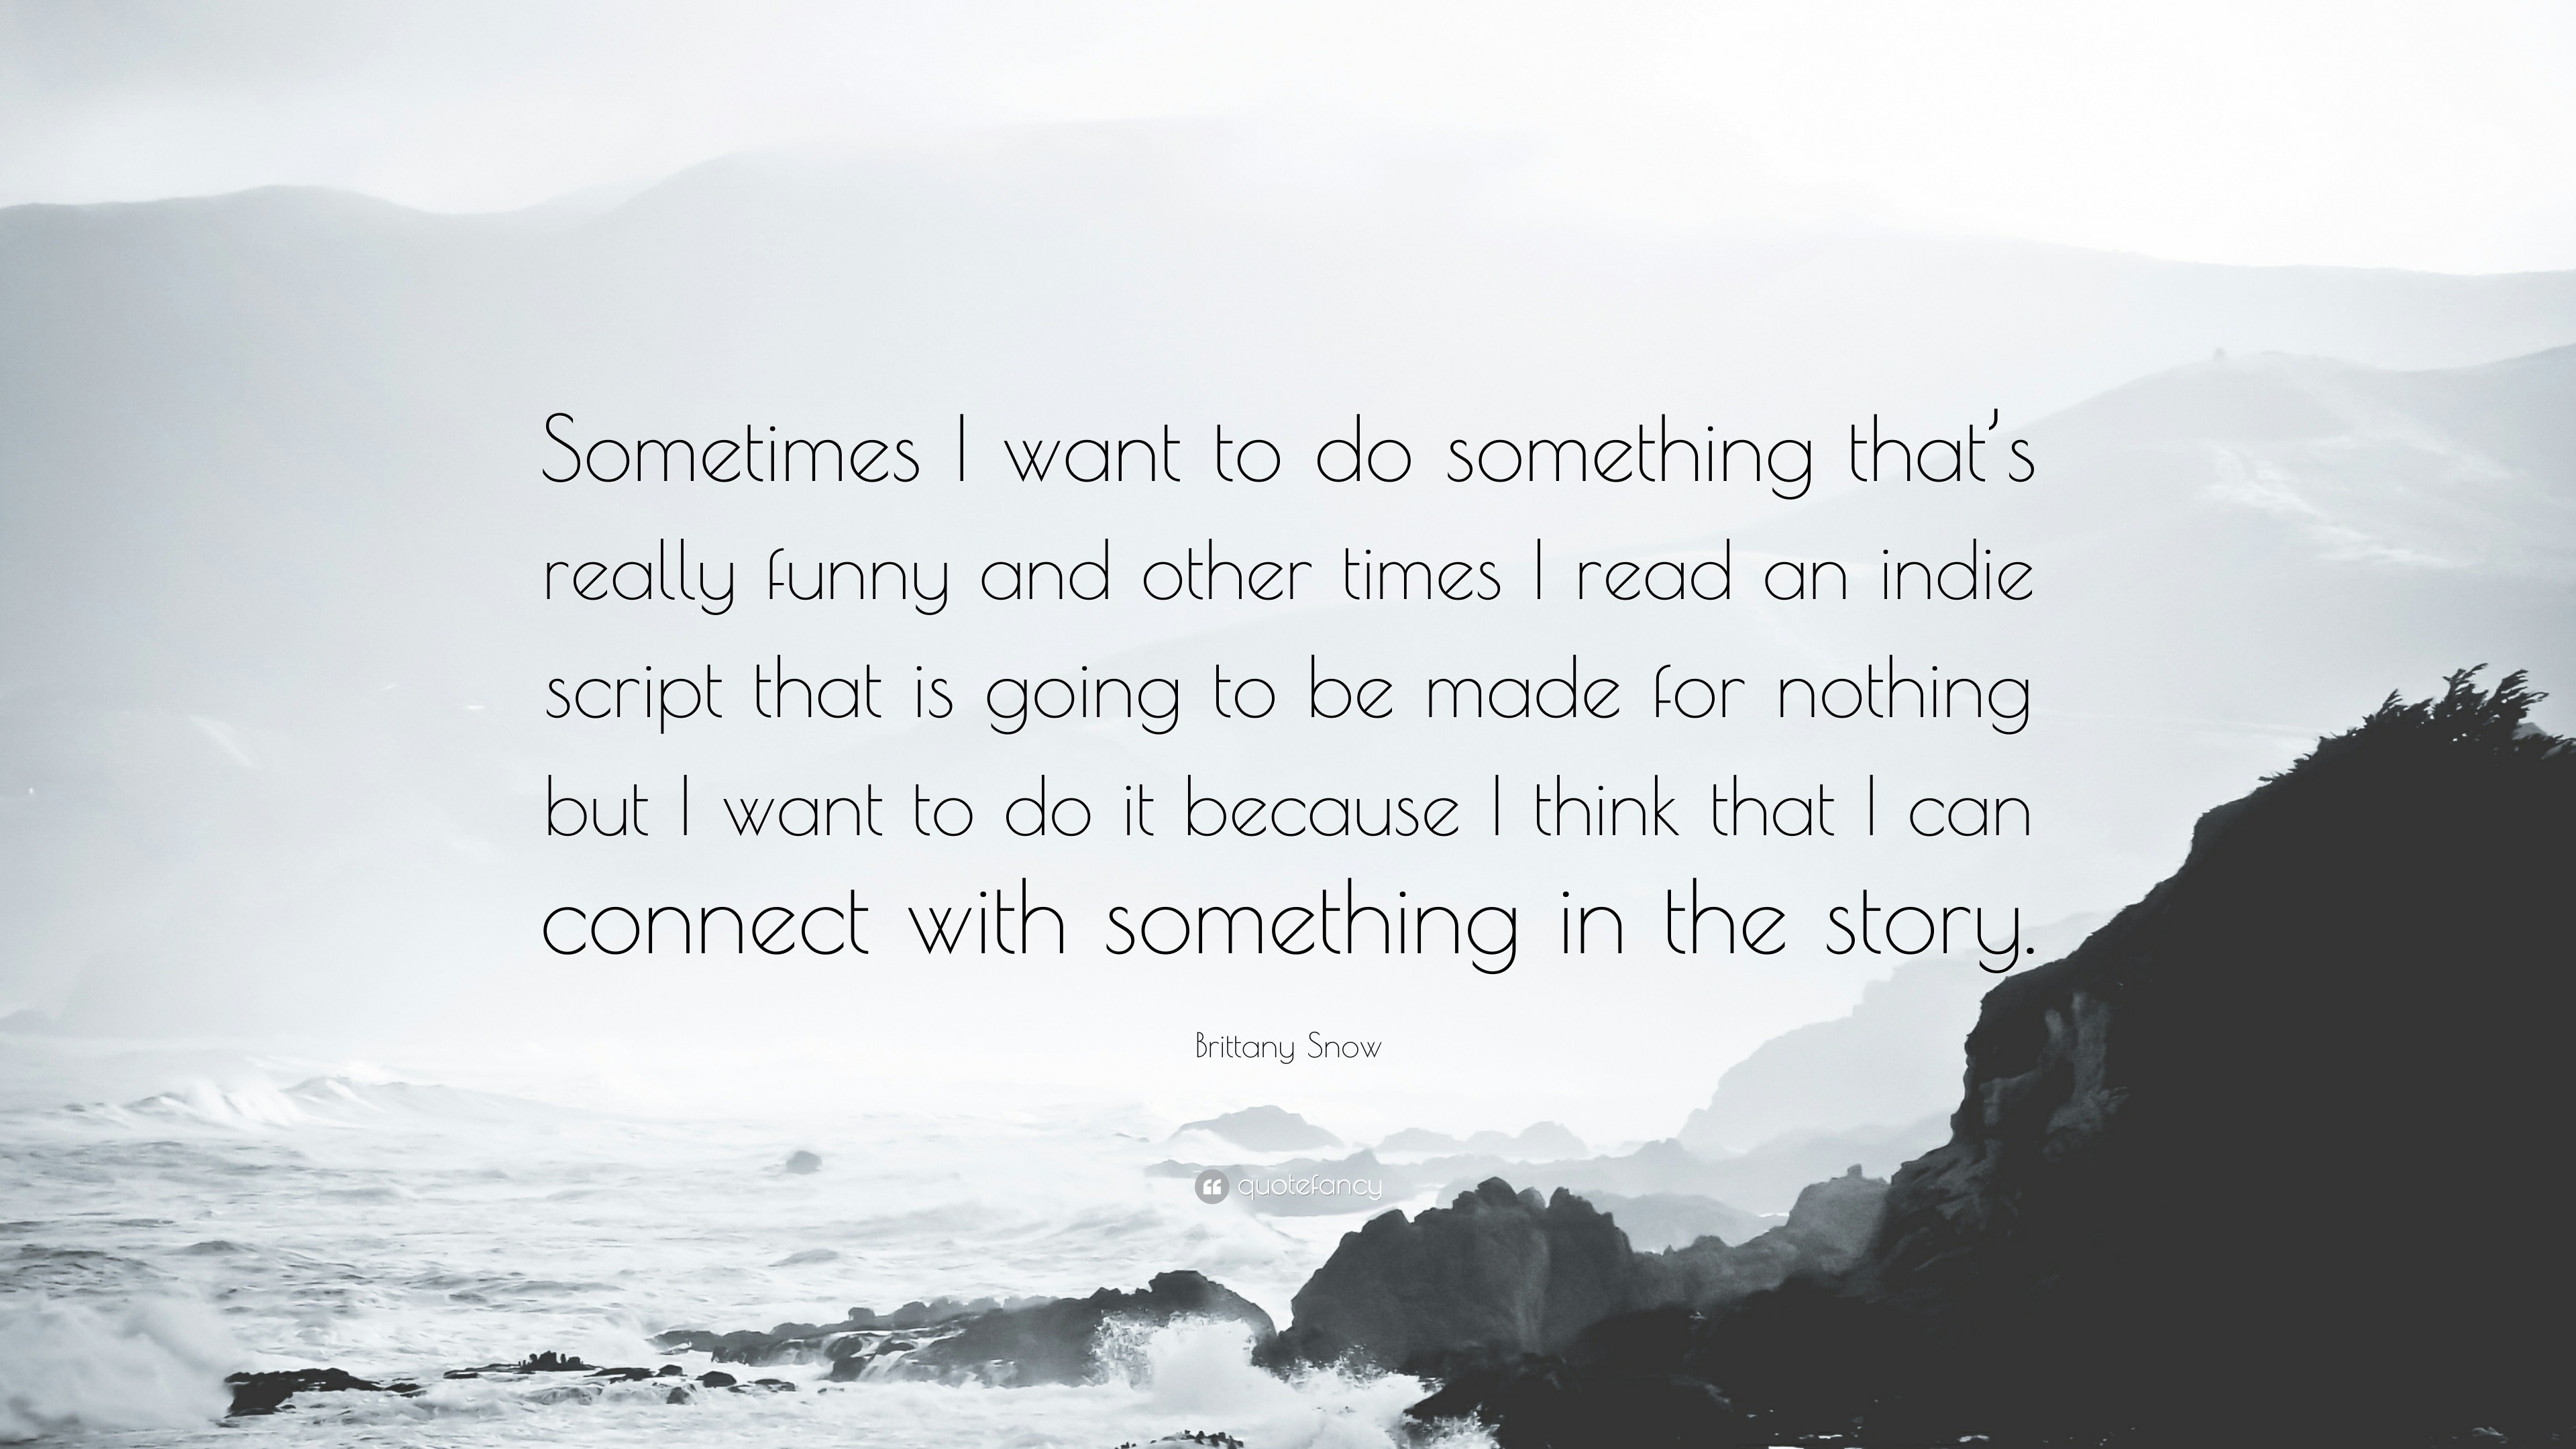 Brittany Snow Quote: “Sometimes I want to do something that's really funny  and other times I read an indie script that is going to be made for...”